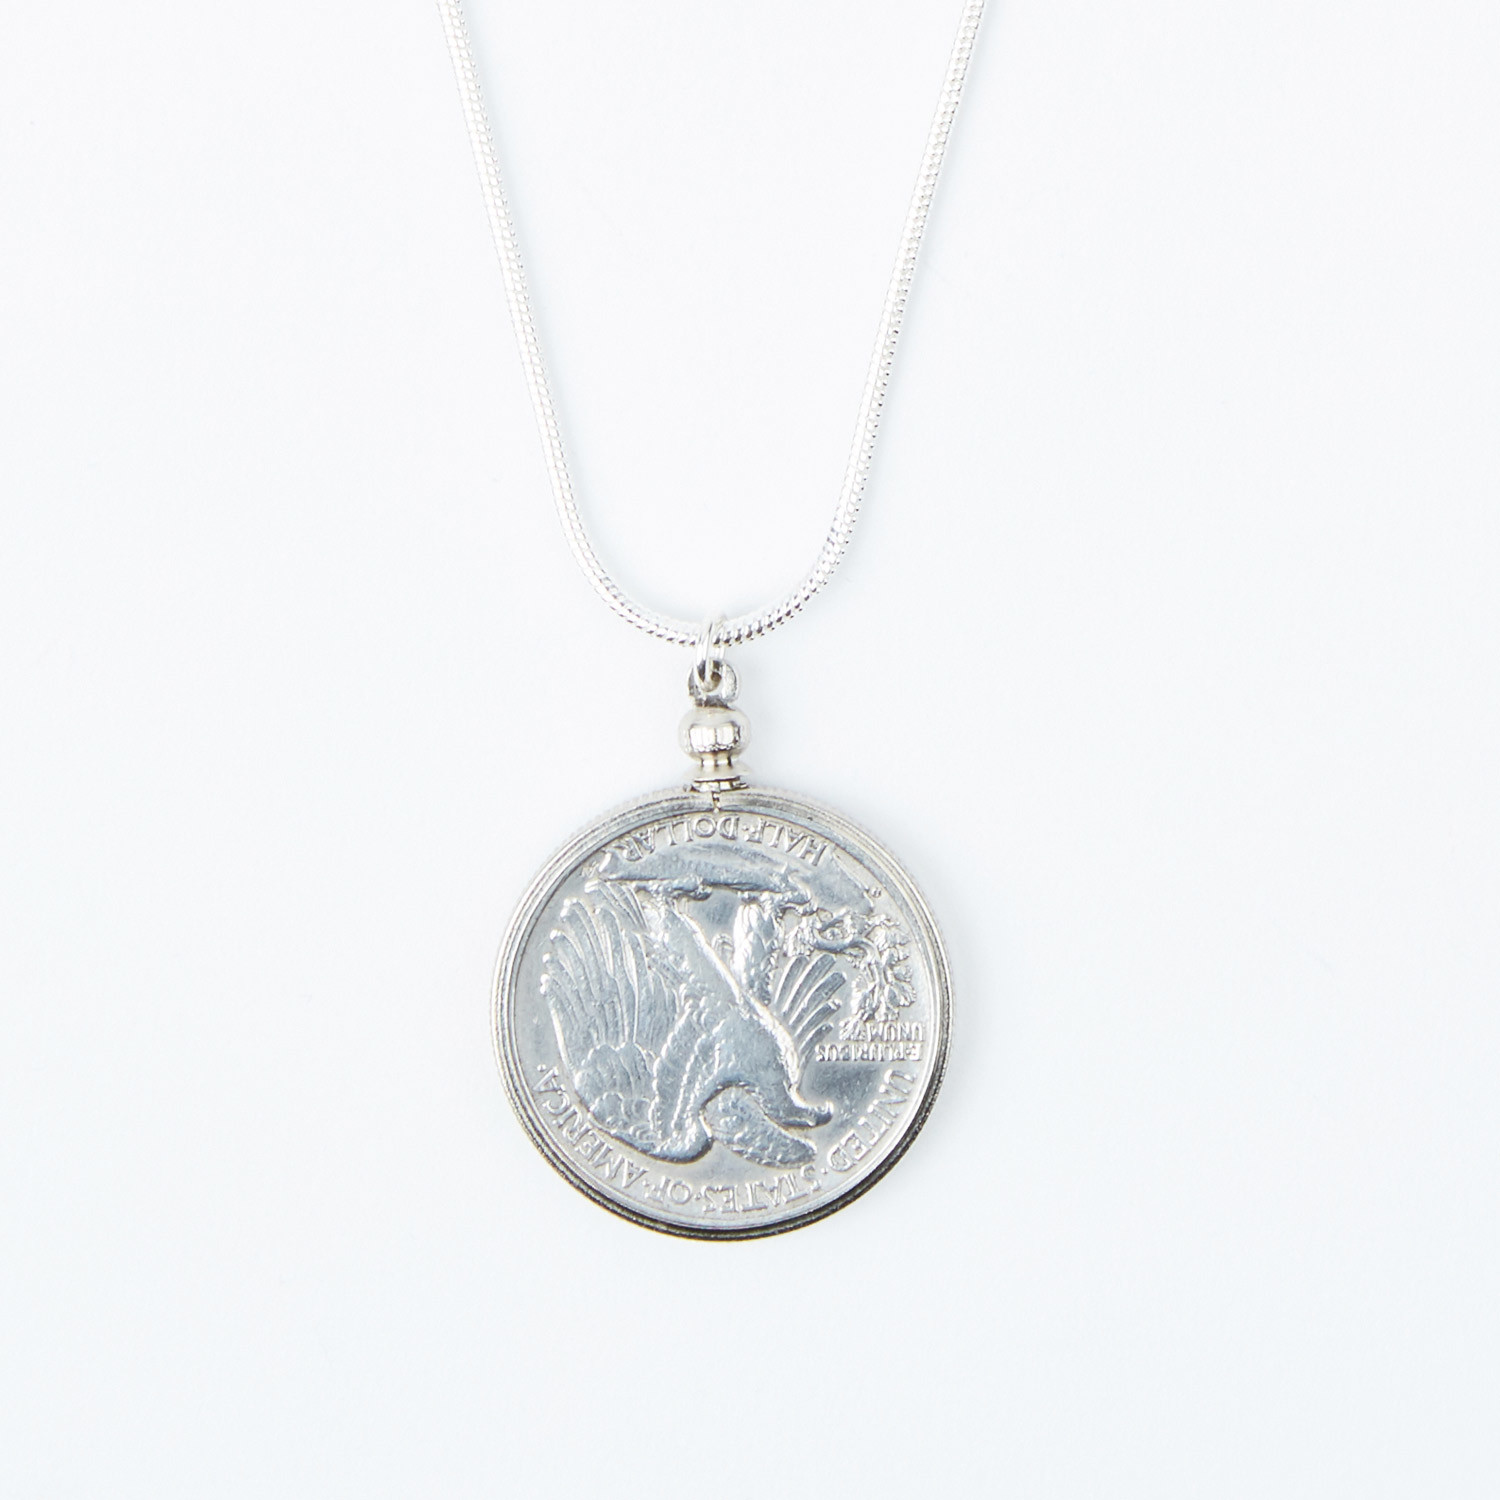 Walking Liberty Coin Necklace - Coin Crafters - Touch of Modern